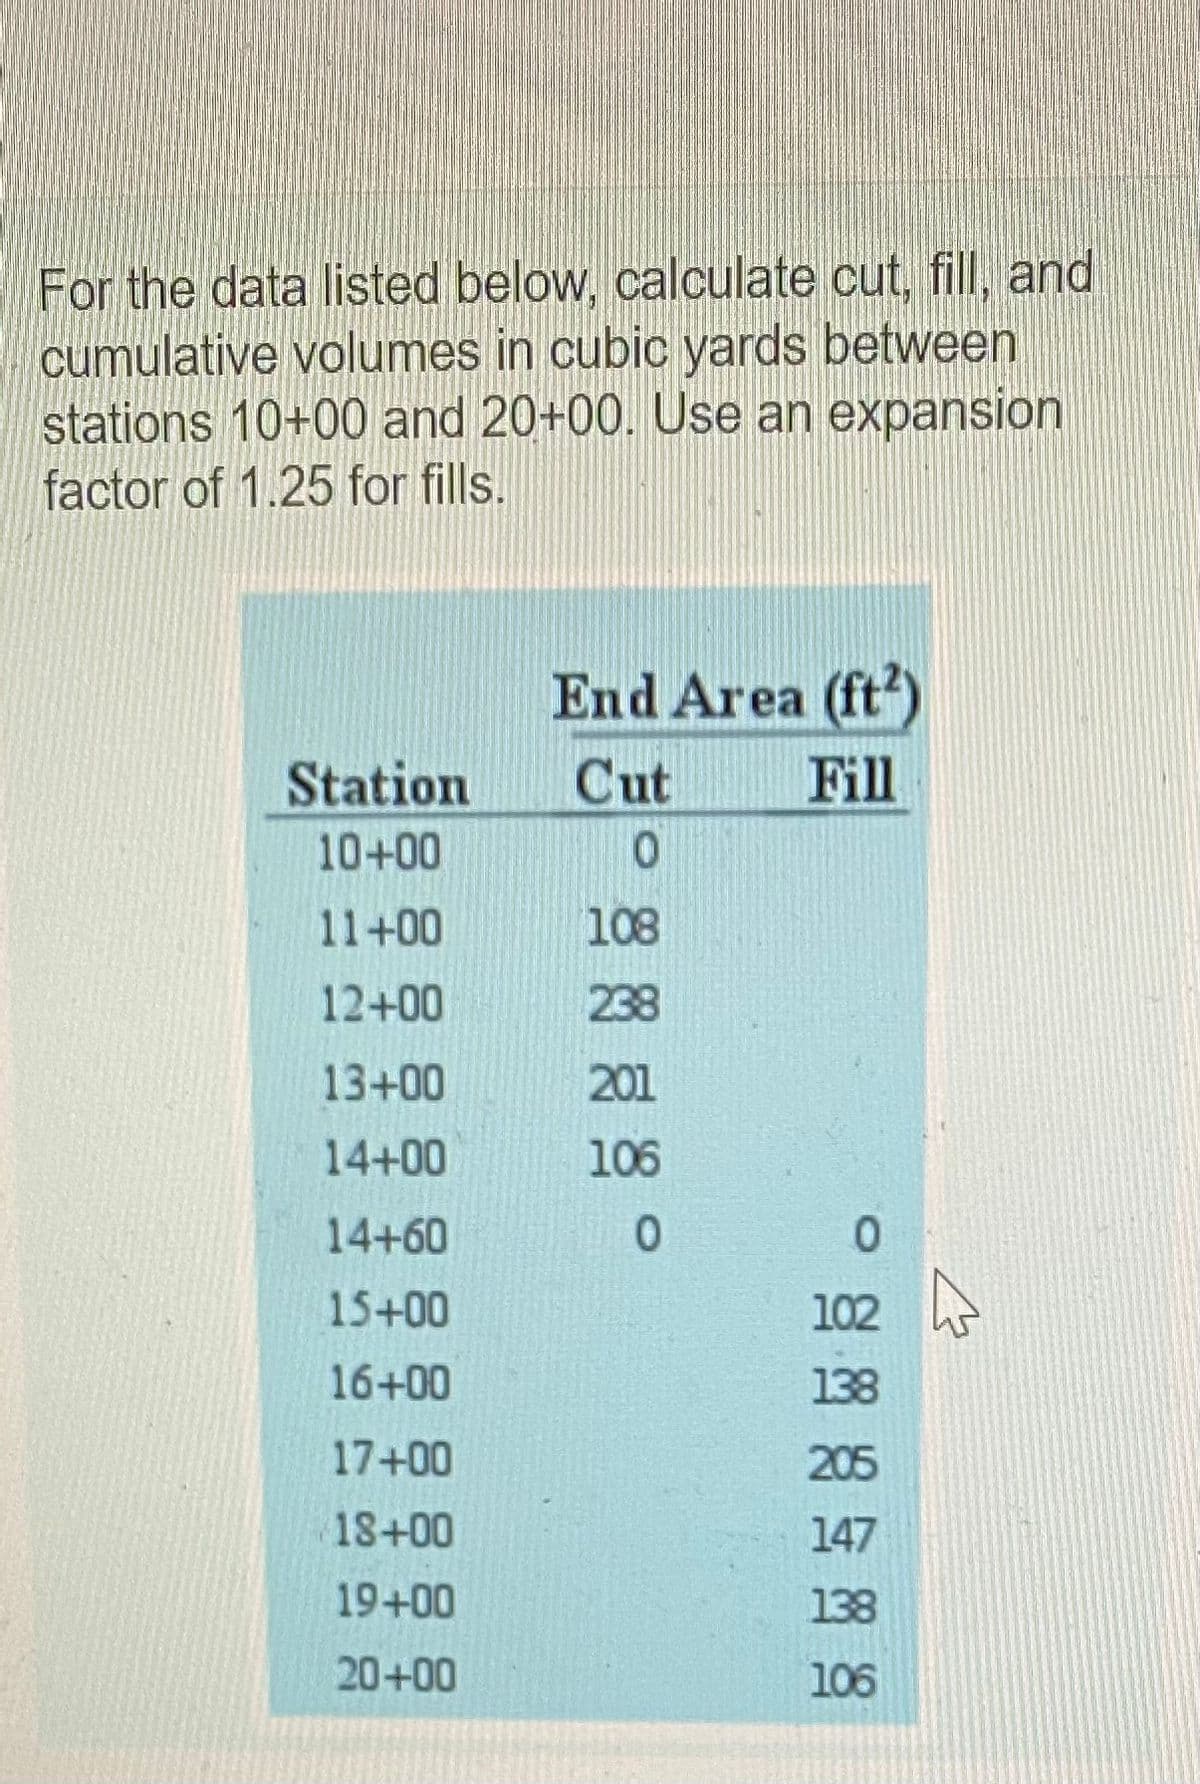 For the data listed below, calculate cut, fill, and
cumulative volumes in cubic yards between
stations 10+00 and 20+00. Use an expansion
factor of 1.25 for fills.
Station
10+00
11+00
12+00
13+00
14+00
14+60
15+00
16+00
17+00
18+00
19+00
20+00
End Area (ft2)
Cut
Fill
0
108
238
201
106
0
0
102
138
205
147
138
106